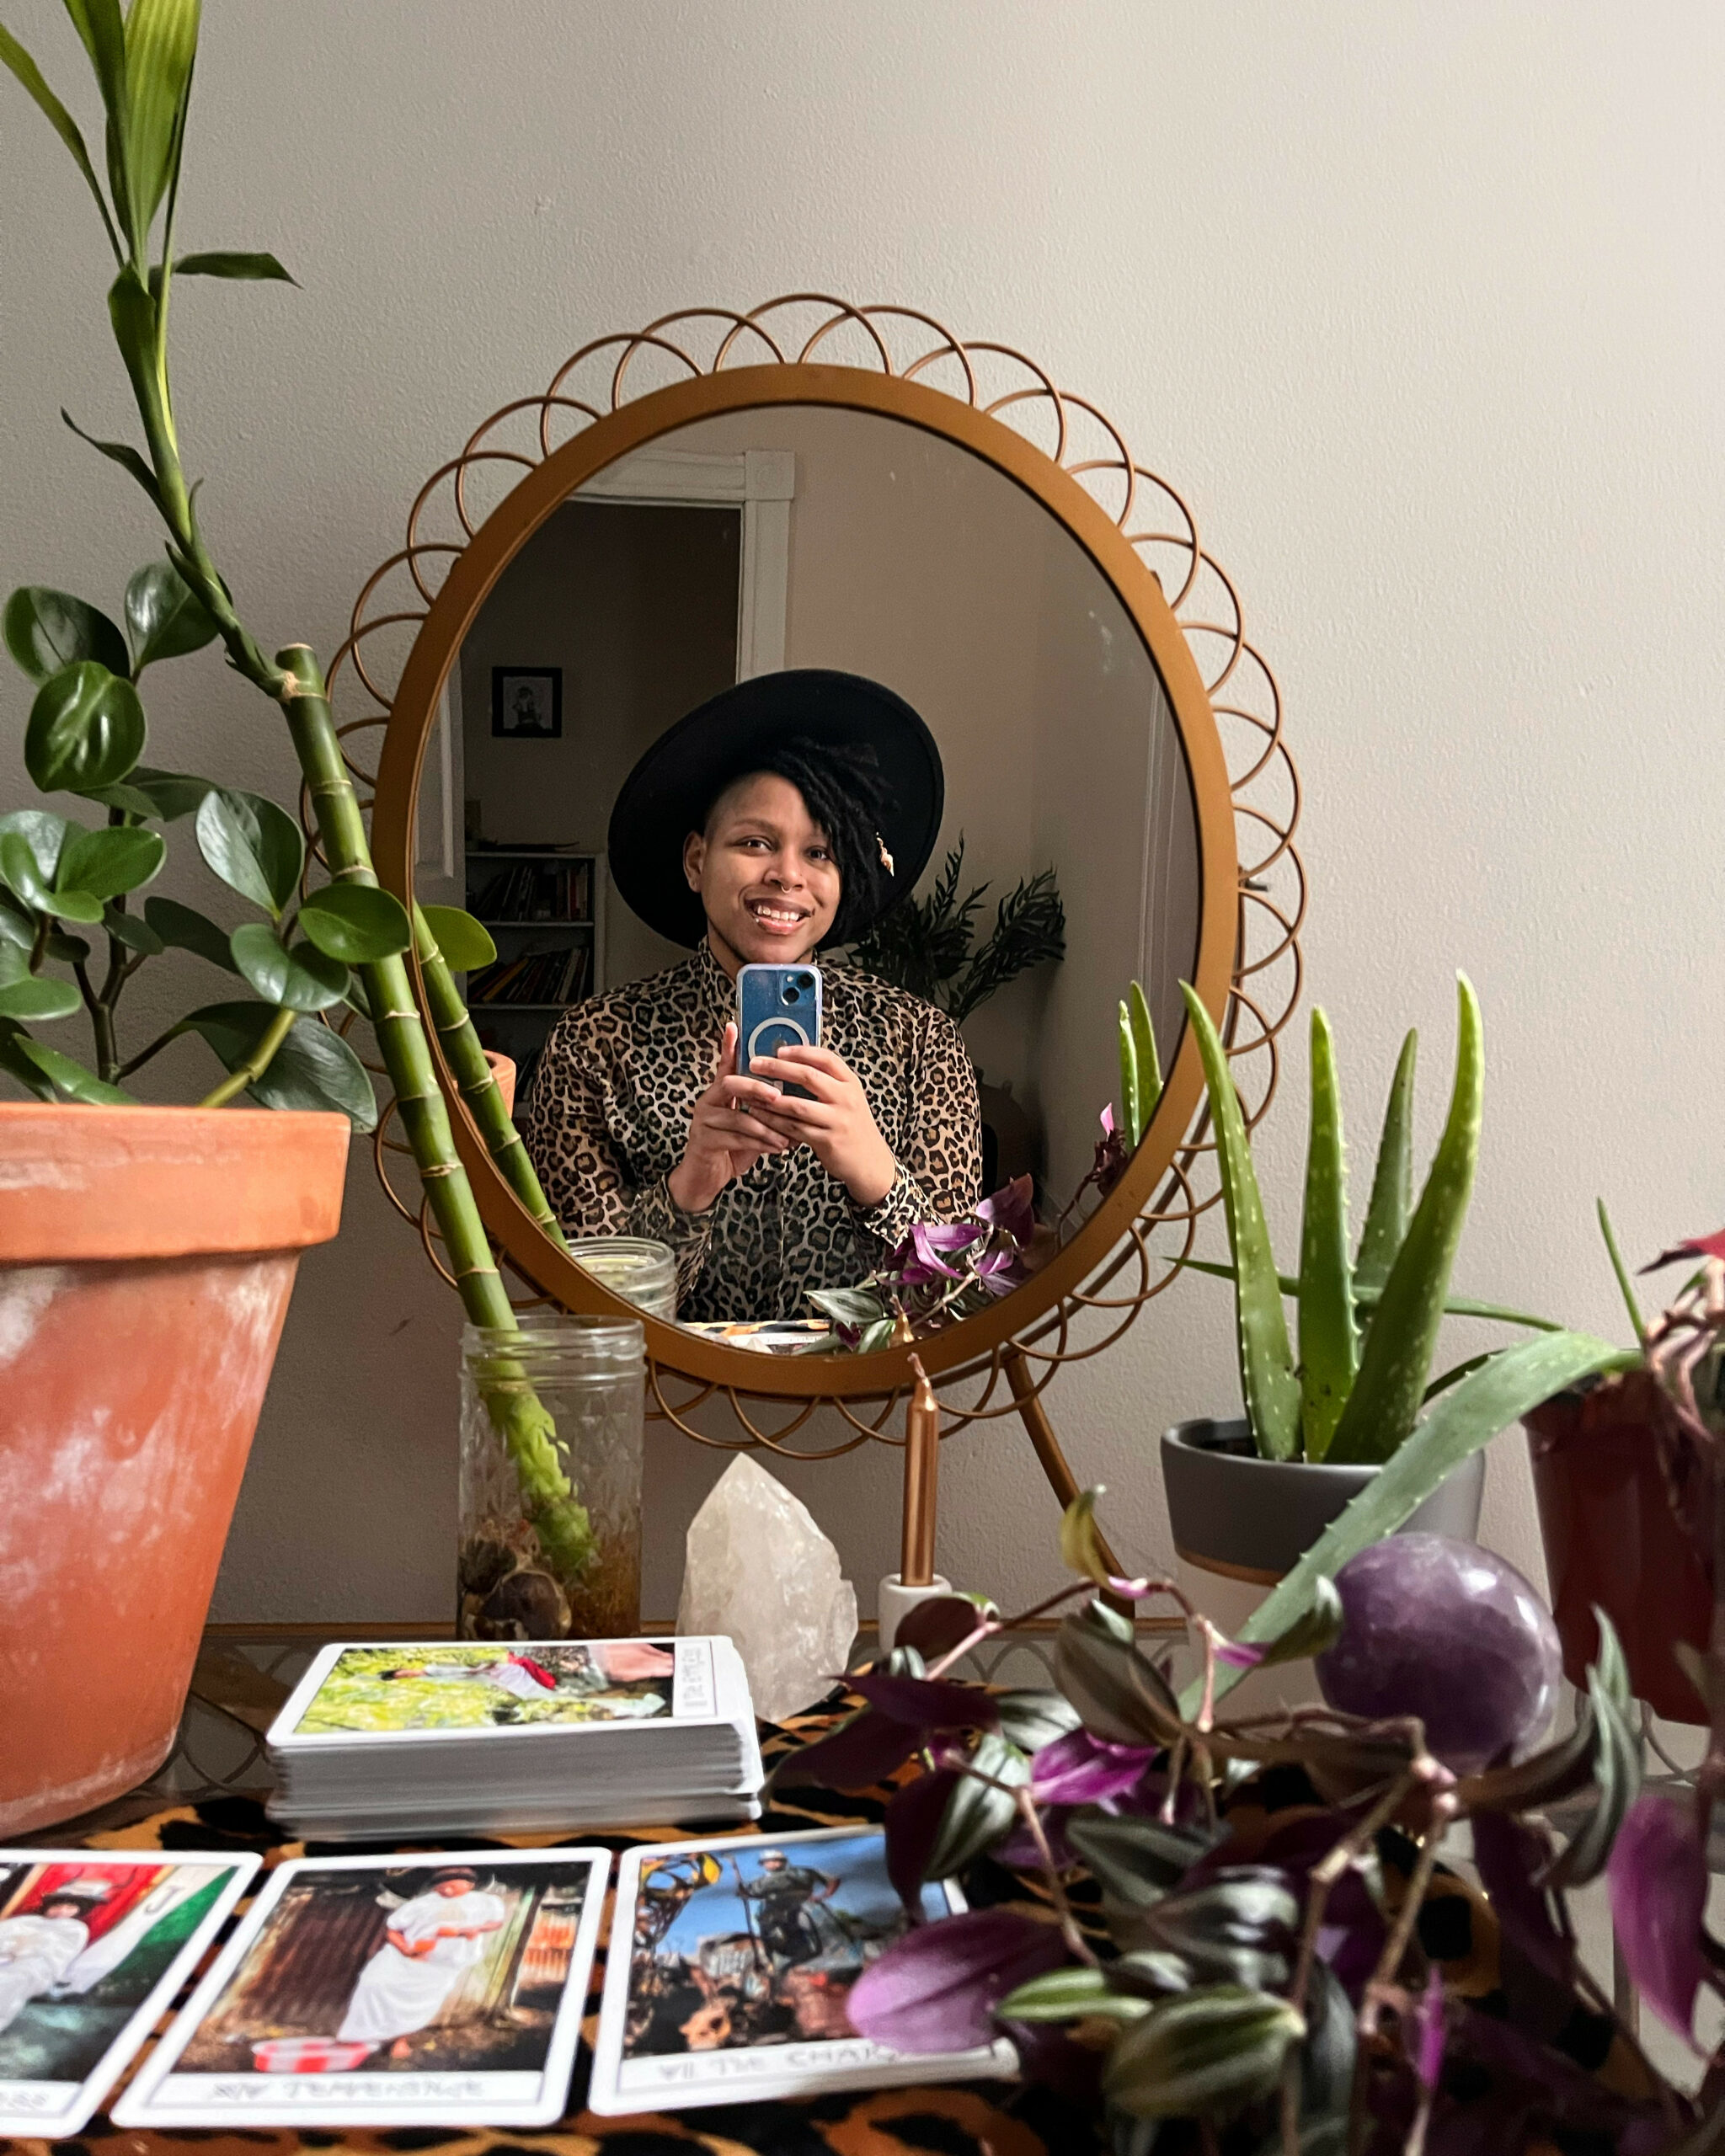 Cyrée, a black trans person, in a mirror. He’s wearing a hat and a leopard print shirt. He’s surrounded by tarot cards and plants.